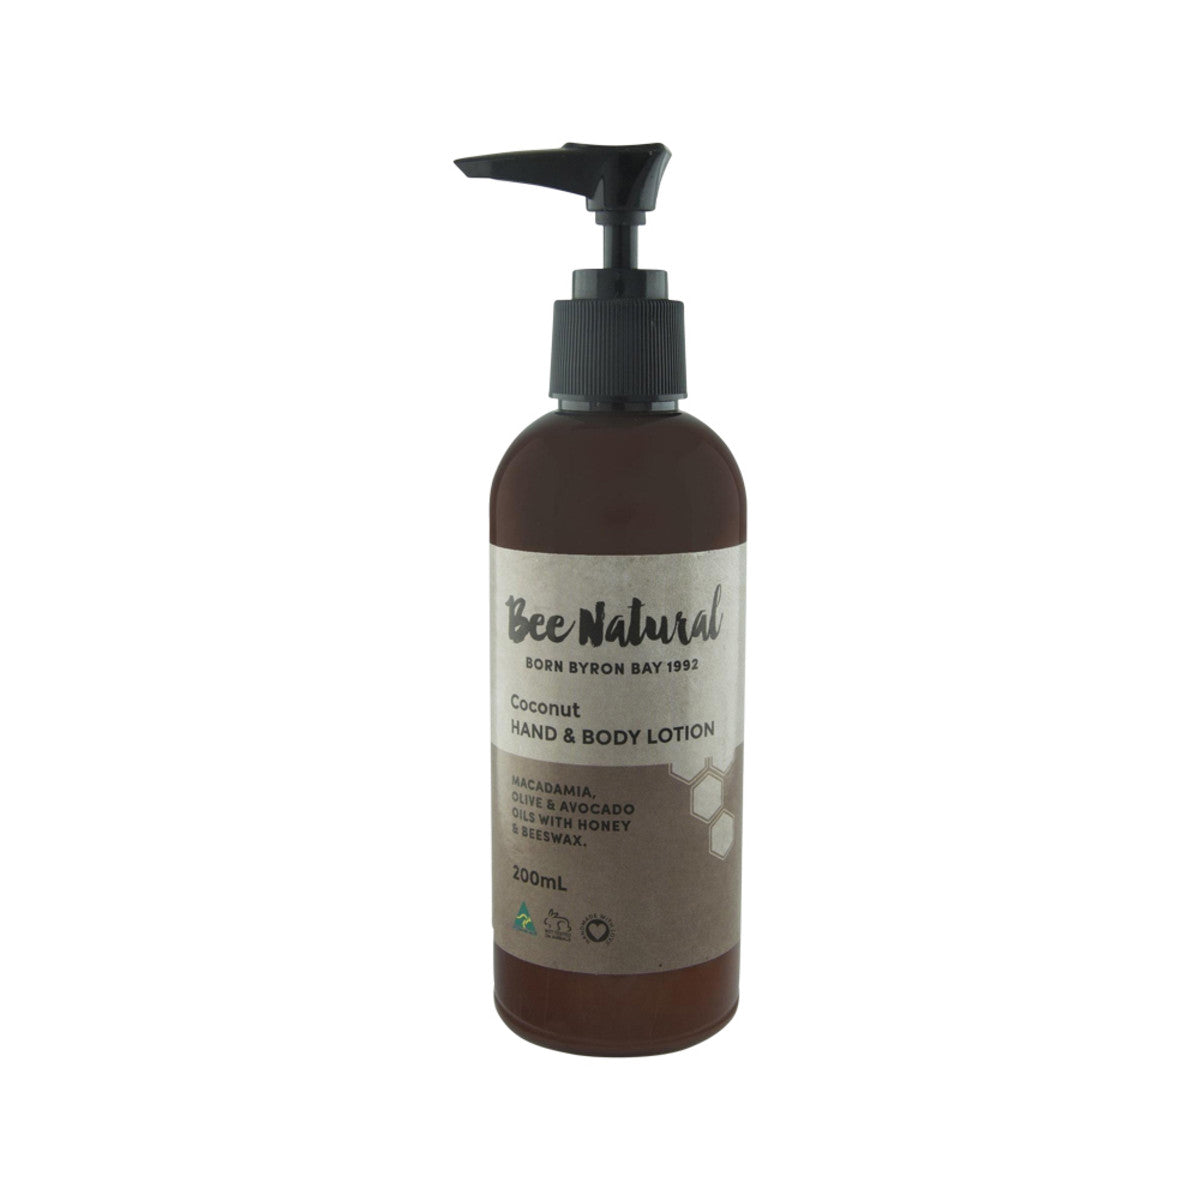 Bee Natural - Hand and Body Lotion Coconut